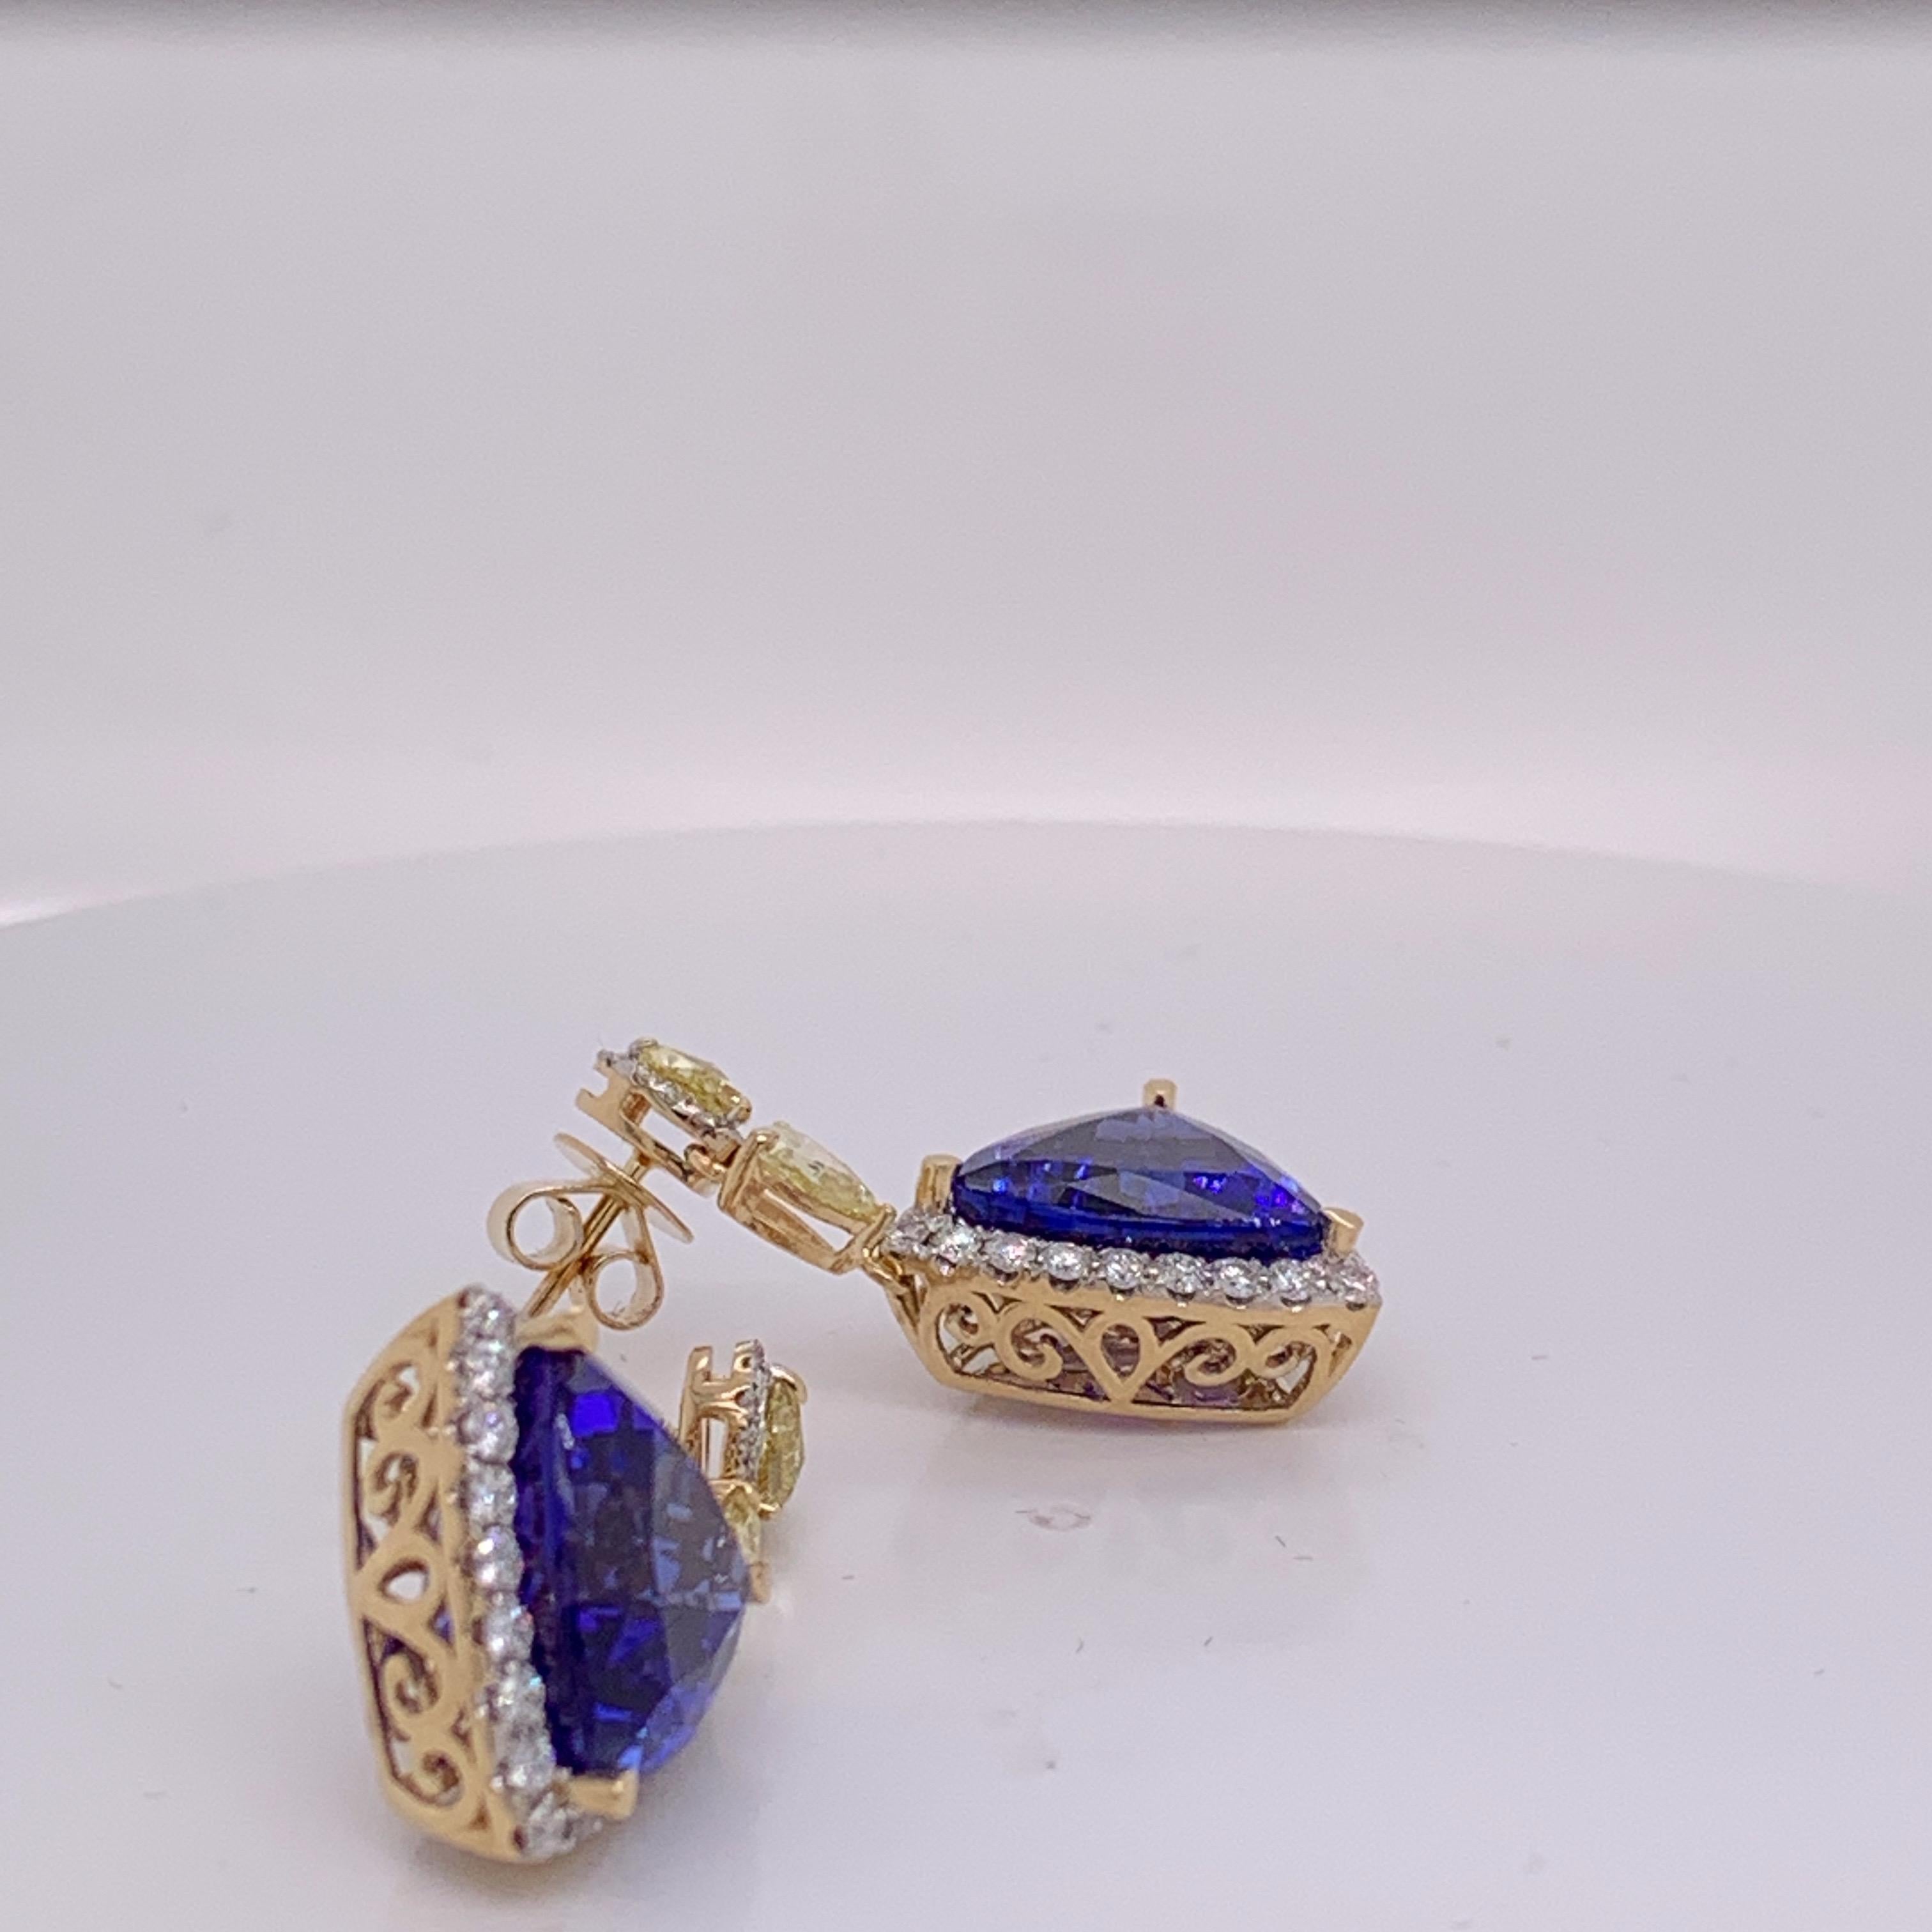 15.83 Carat Tanzanite Dangle Earrings with Yellow and White Diamond For Sale 4